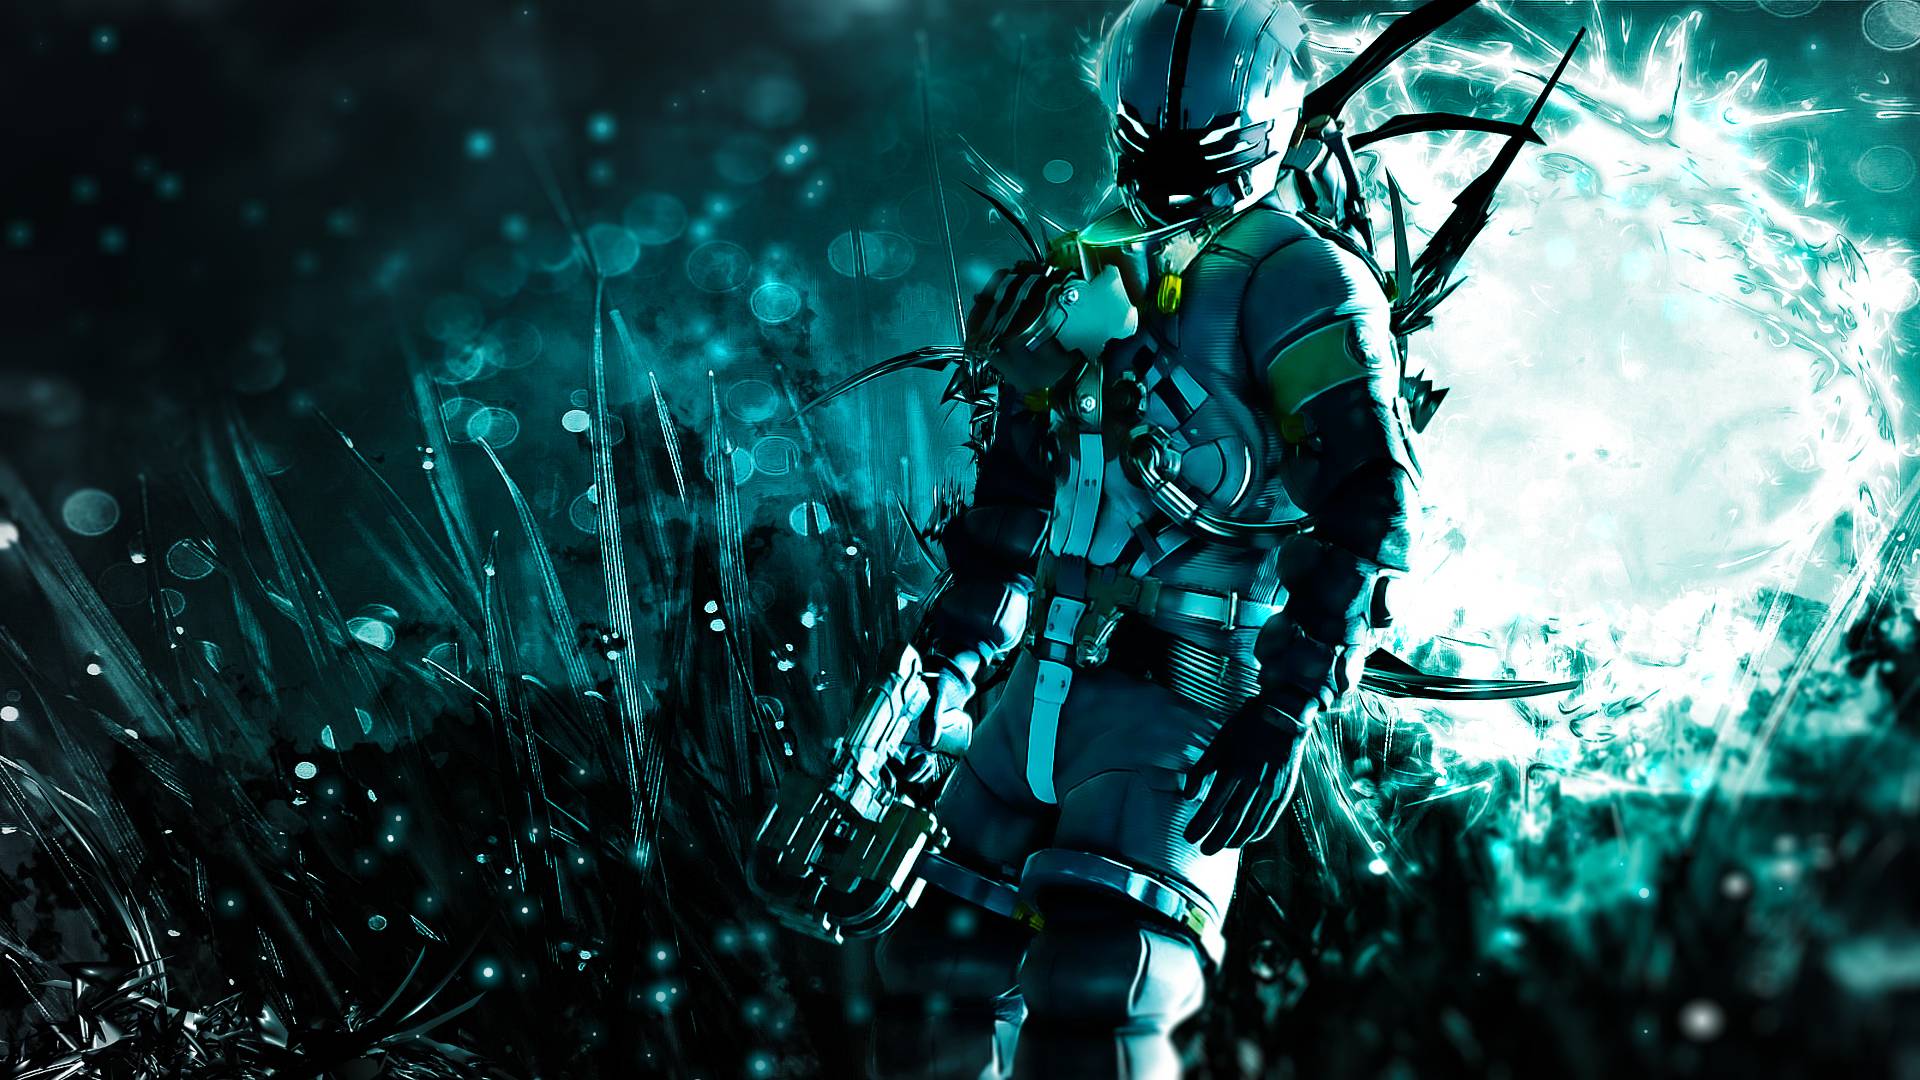 Dead Space HD Wallpapers - Wallpaper Cave